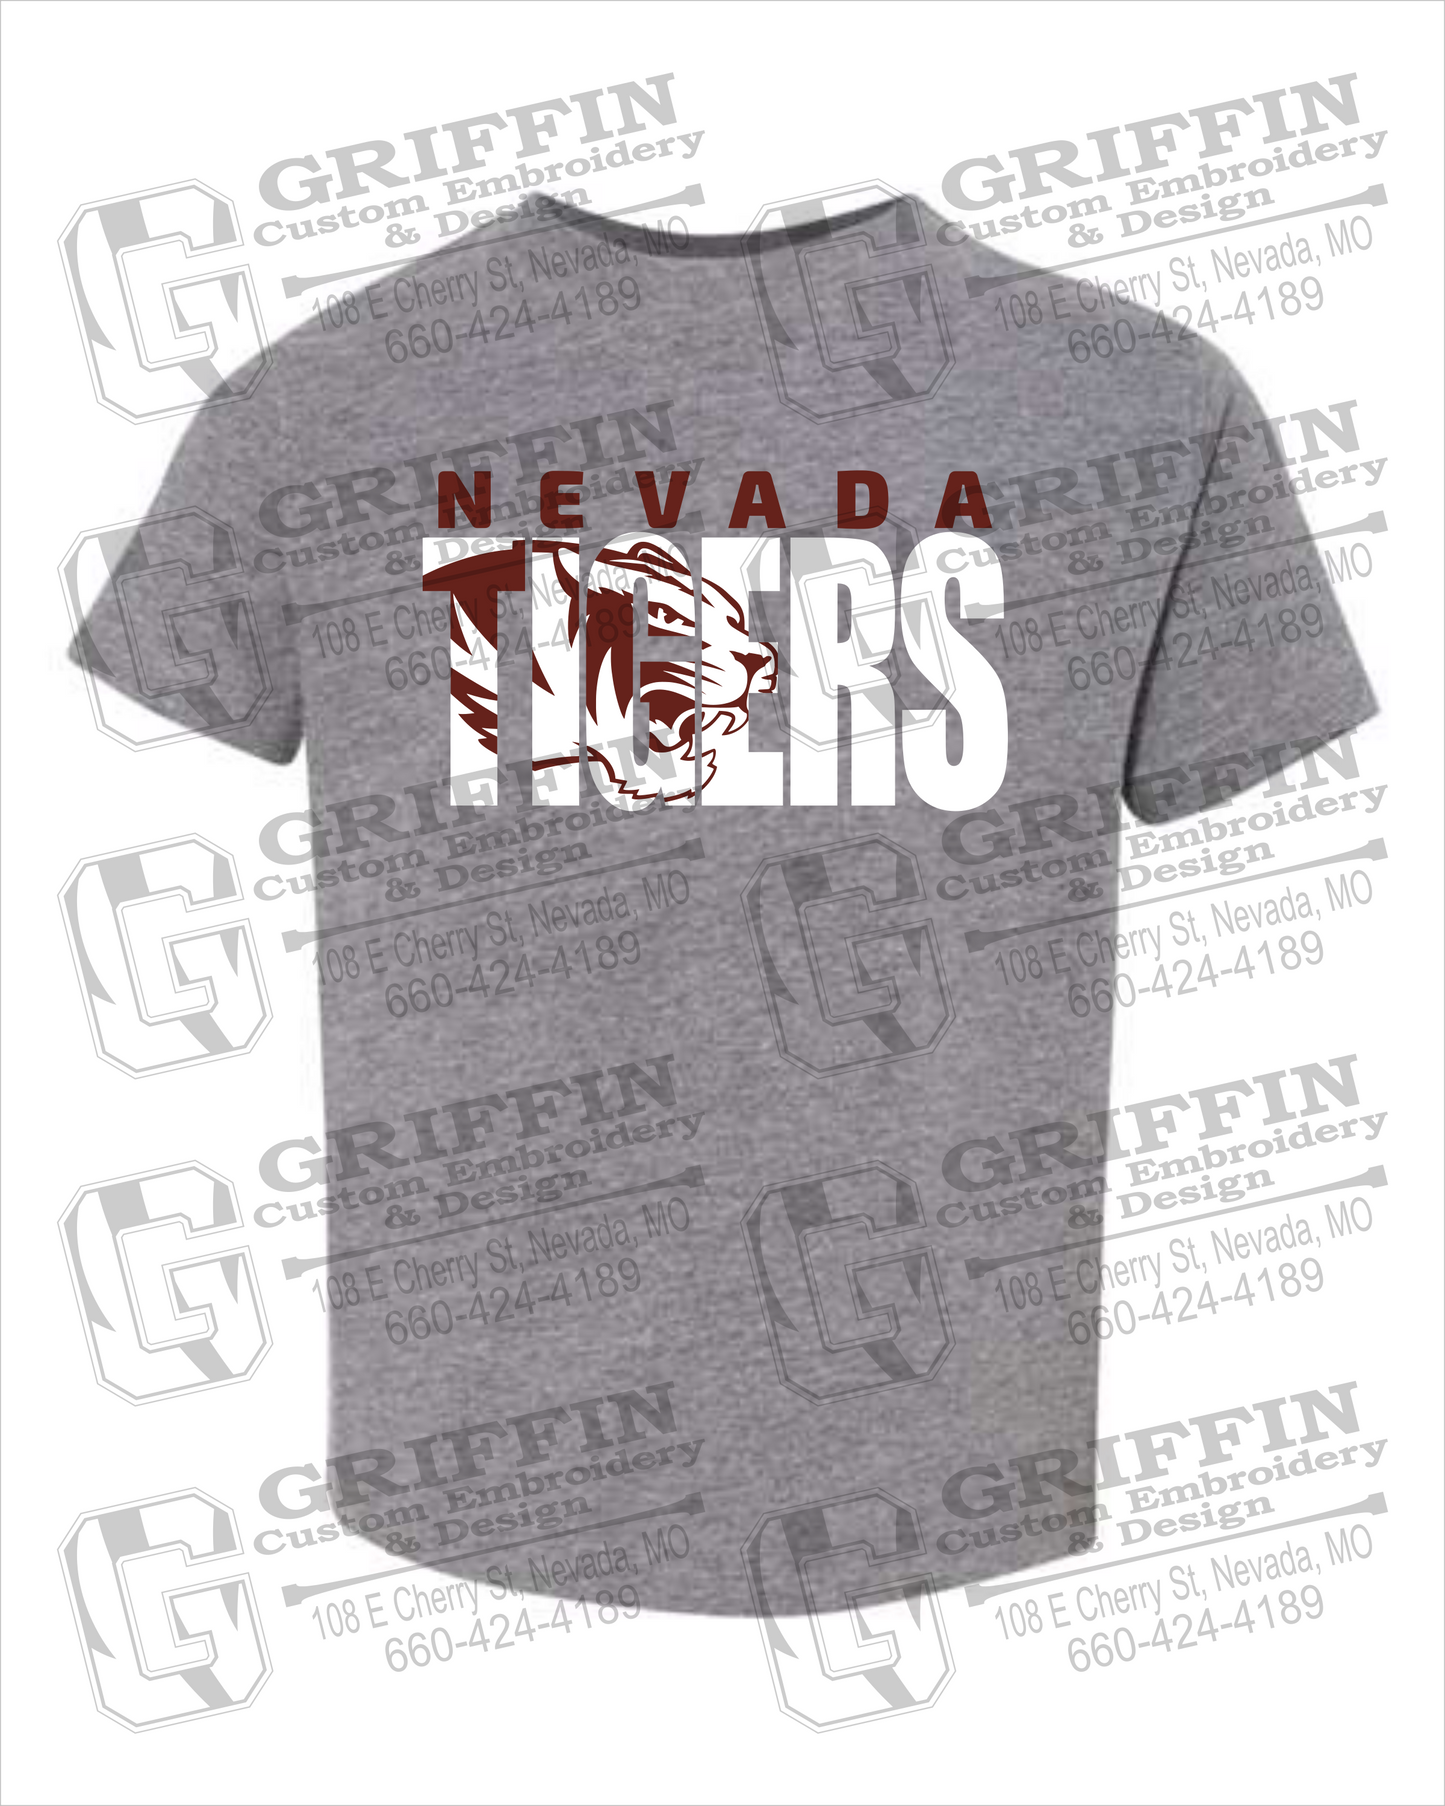 Nevada Tigers 23-F Toddler/Infant T-Shirt